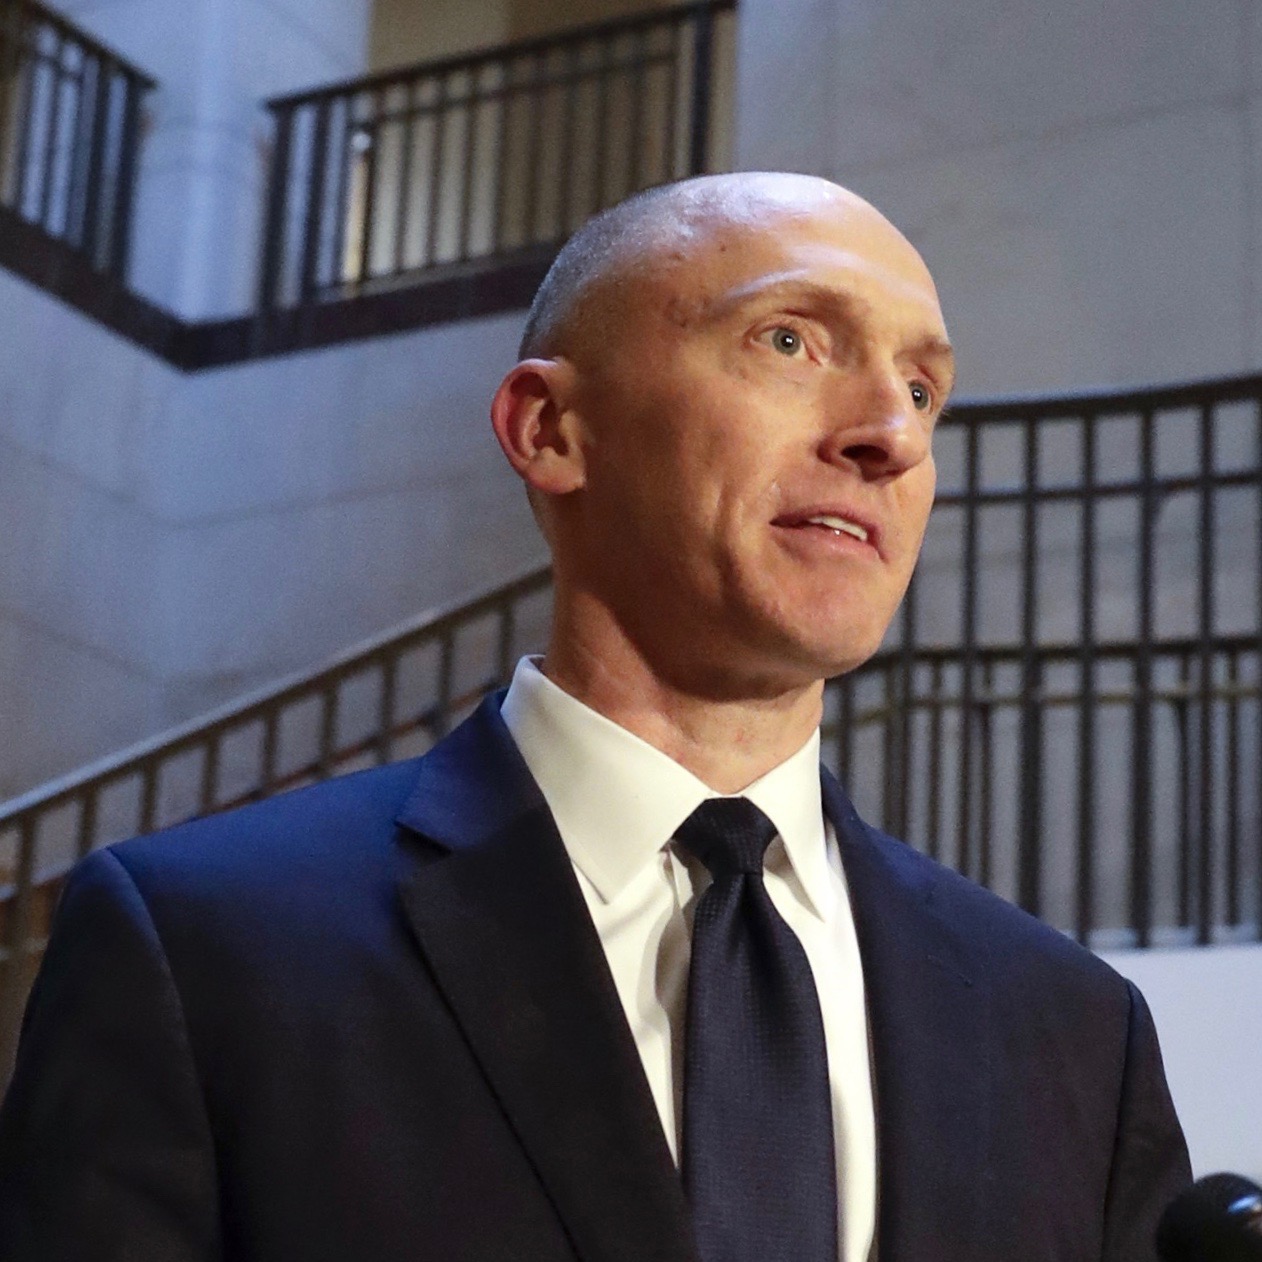 FBI Used Media Stories And Steele Dossier To Obtain Carter Page FISA Warrants [VIDEO]